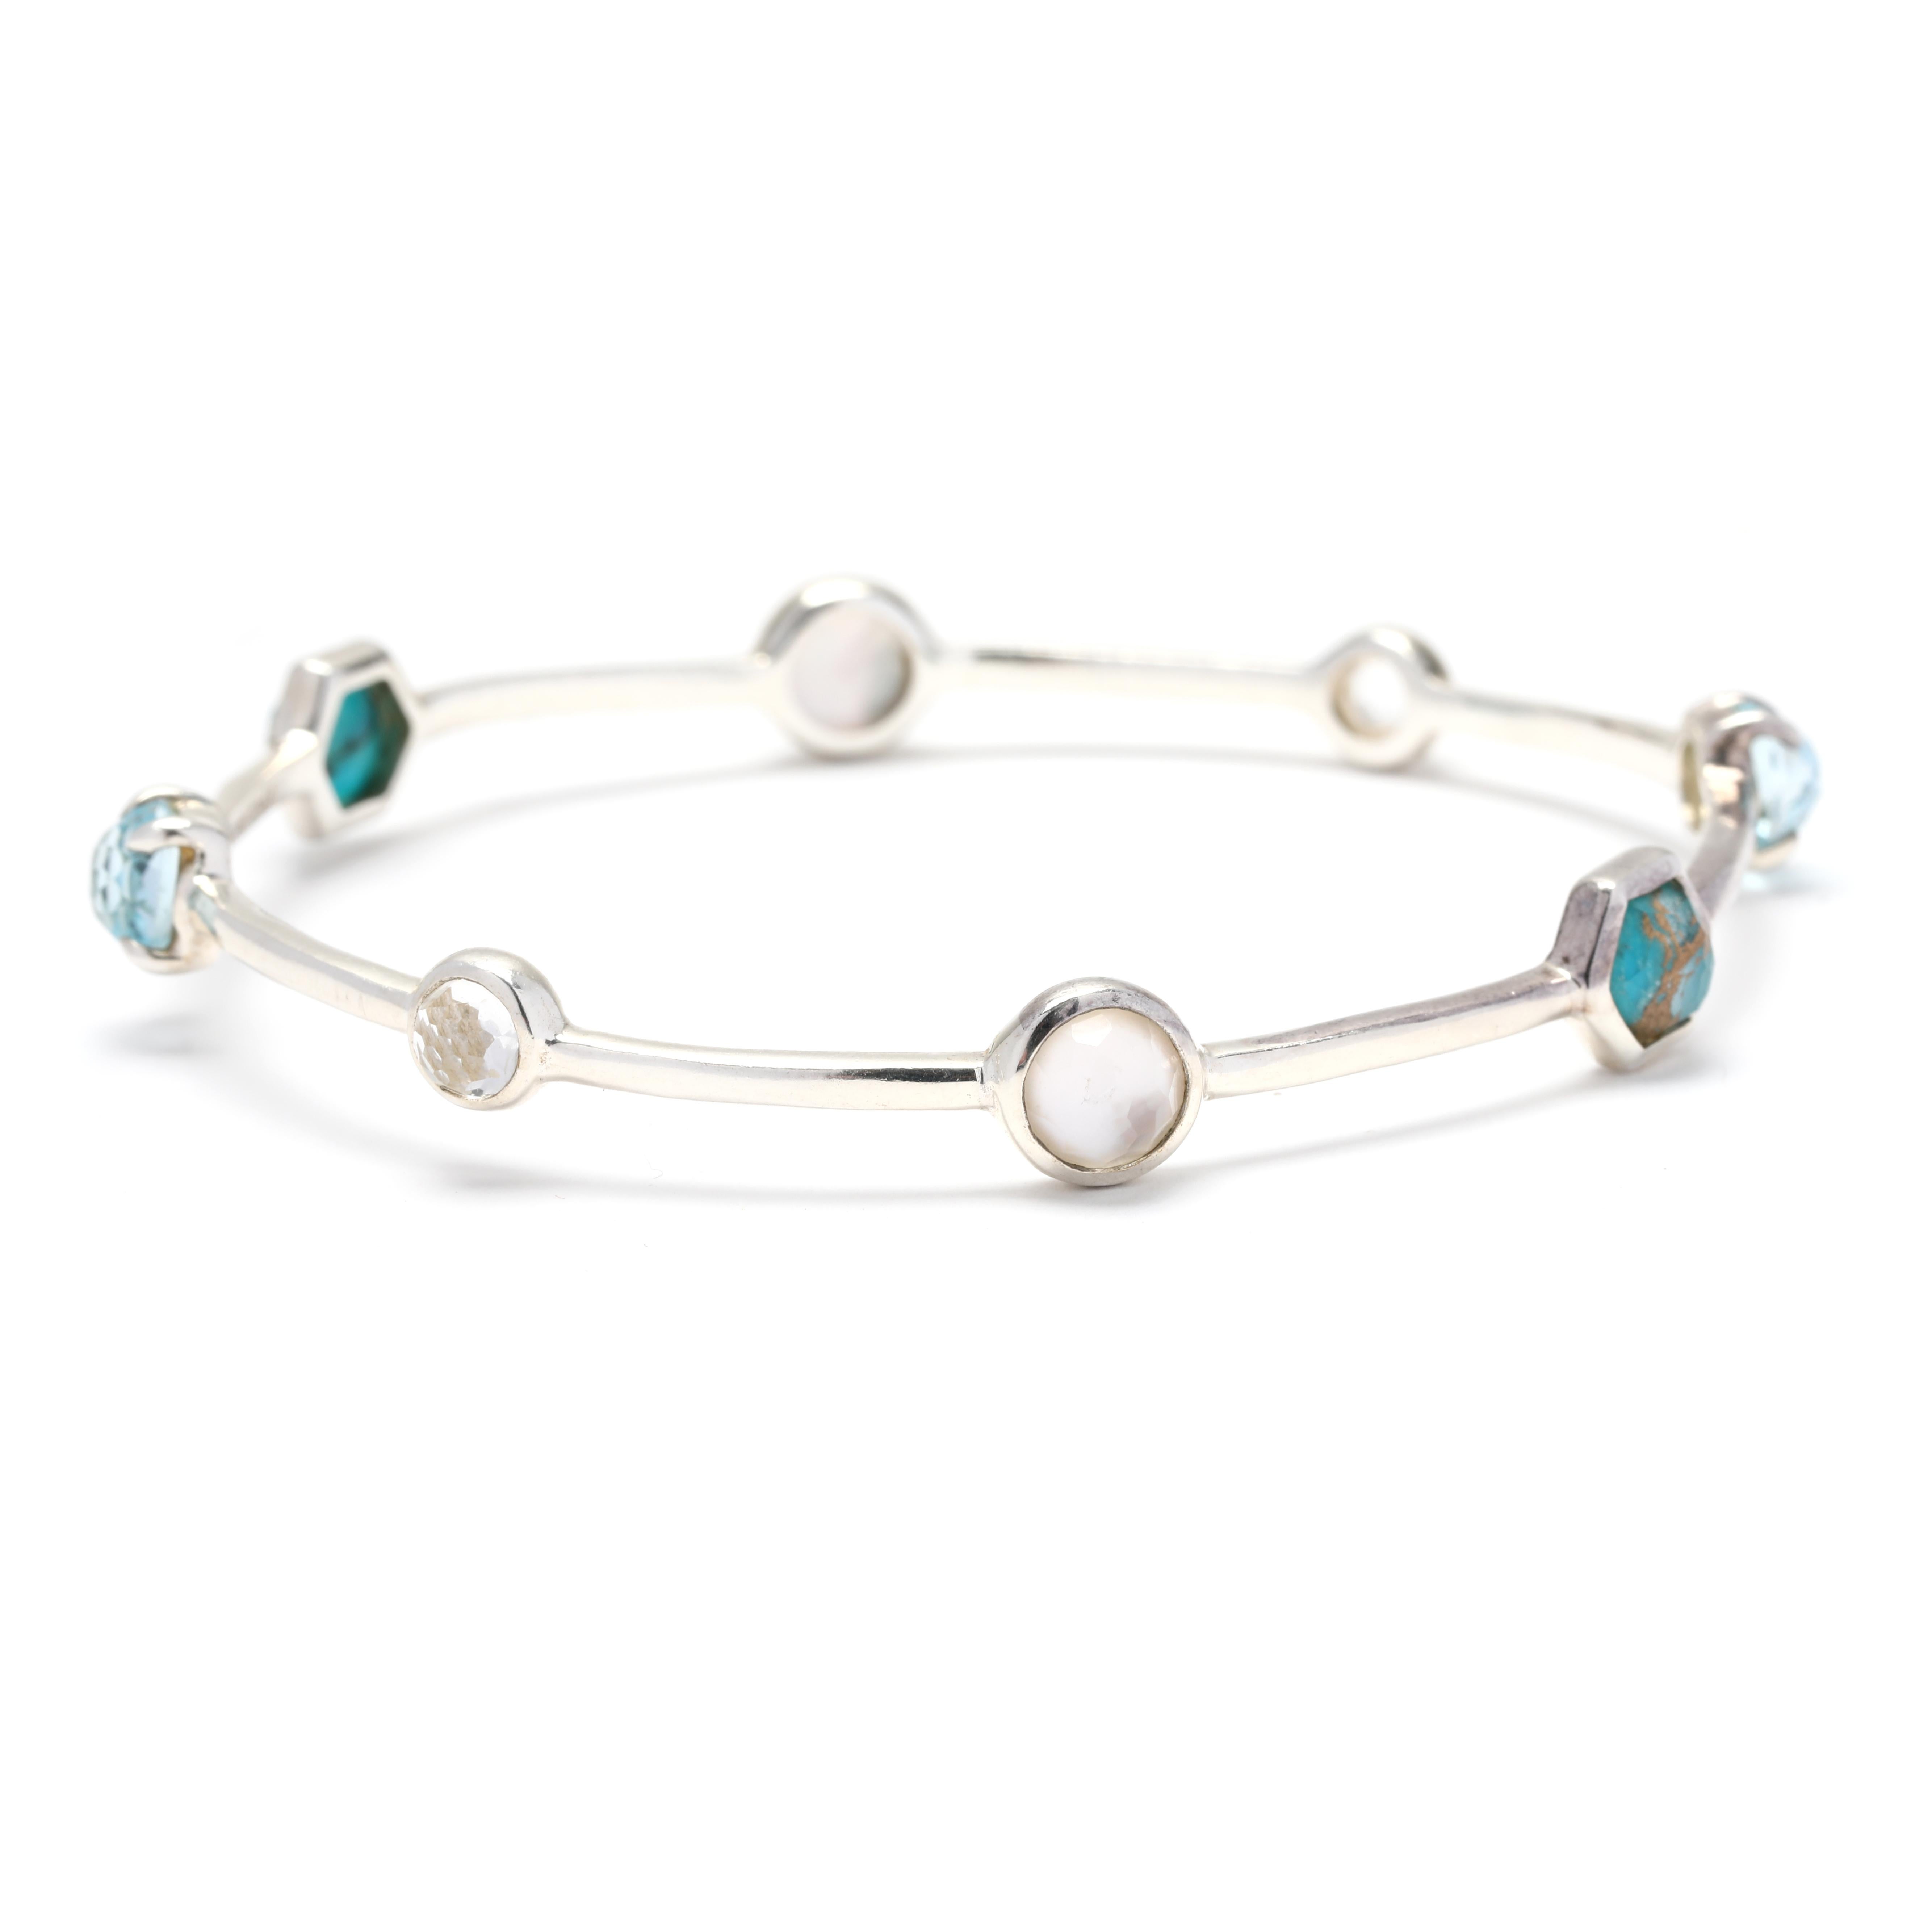 This Ippolita Rock Candy Turquoise Blue Topaz Bangle Bracelet is a stunning piece of jewelry that will add a pop of color to any outfit. Made from high-quality sterling silver, this bracelet features a beautiful combination of turquoise and blue